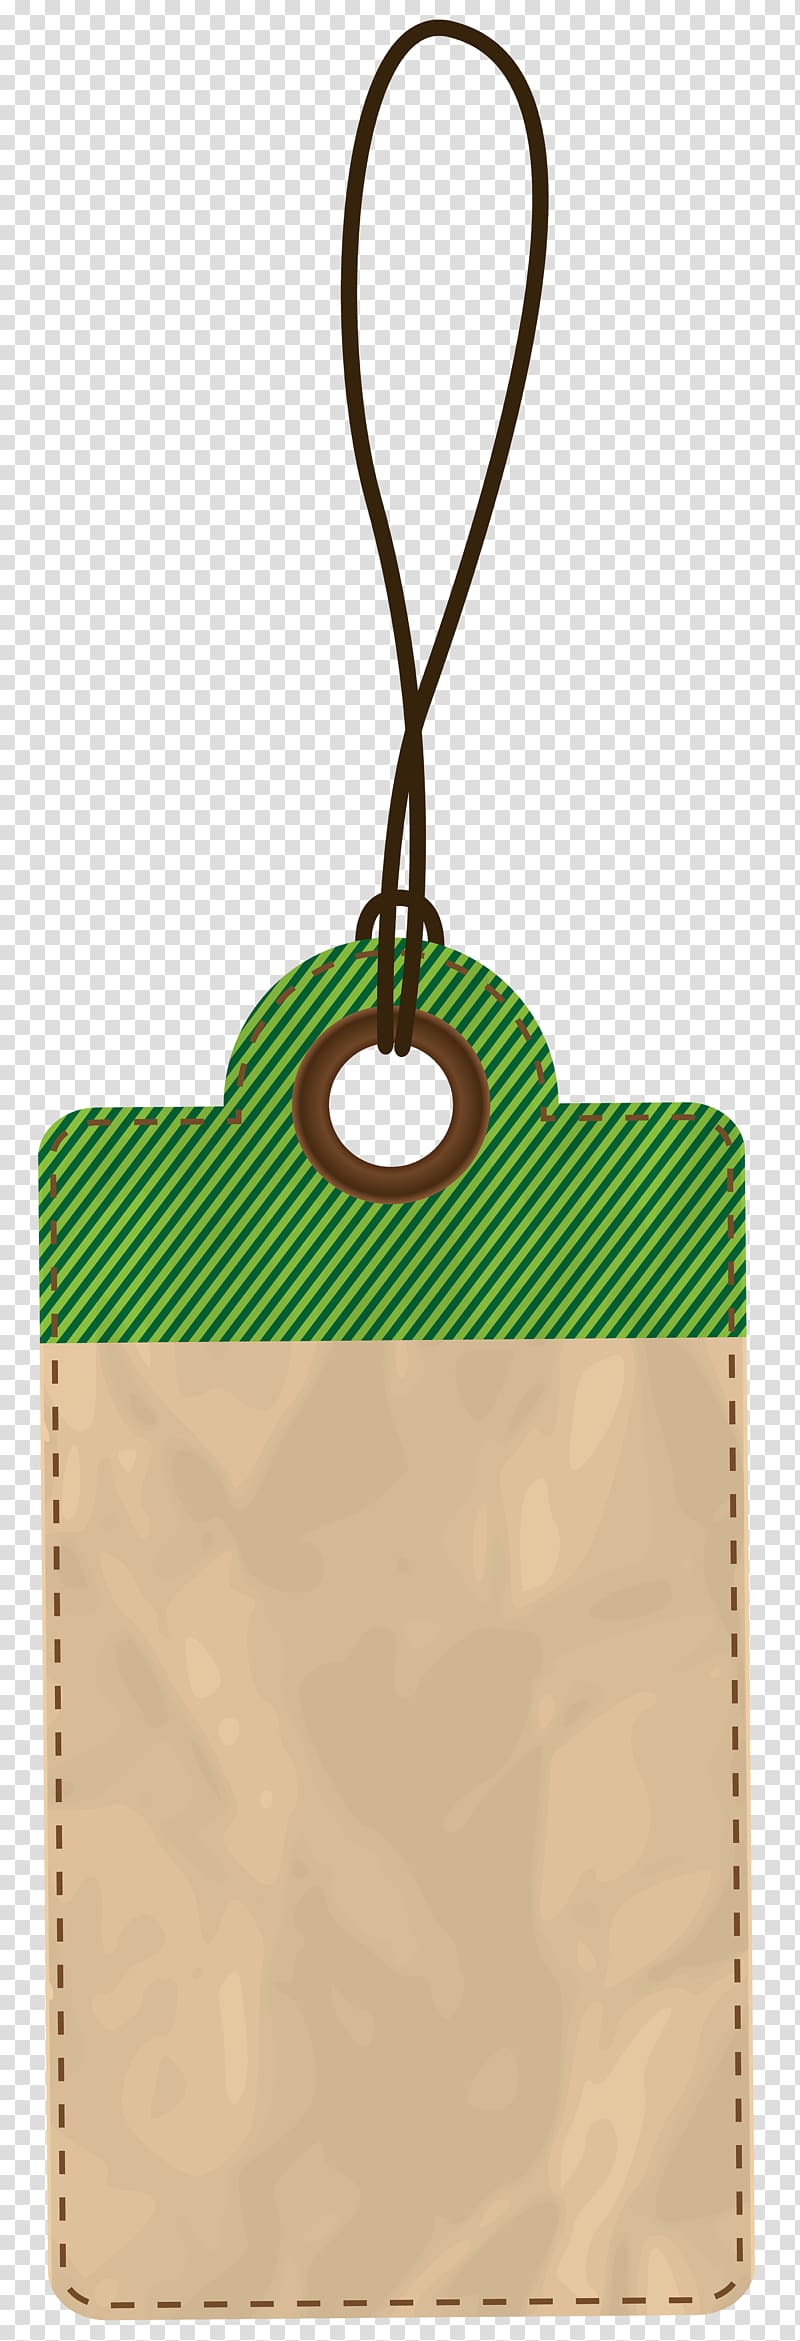 green and brown pouch keychain, Price , Empty Price Tag transparent background PNG clipart